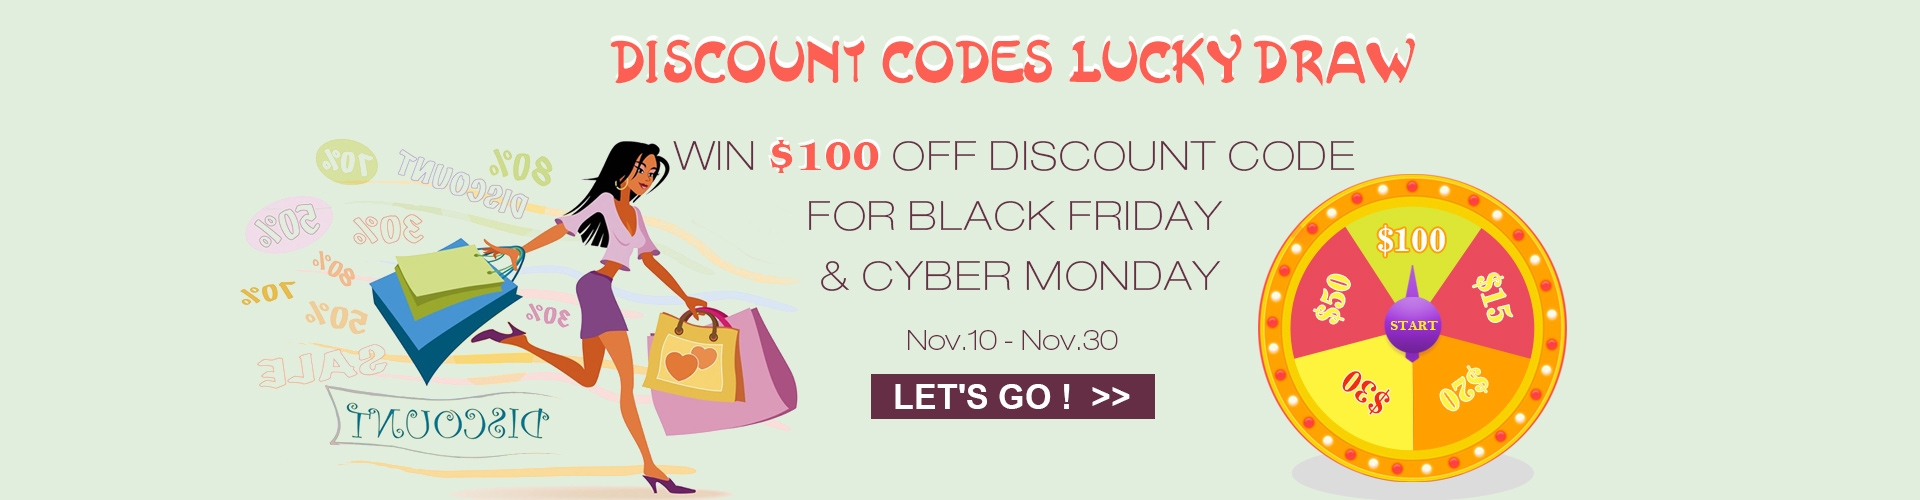 Enter The Lucky Draw To Win A $100 Discount Code for Black Friday & Cyber Monday